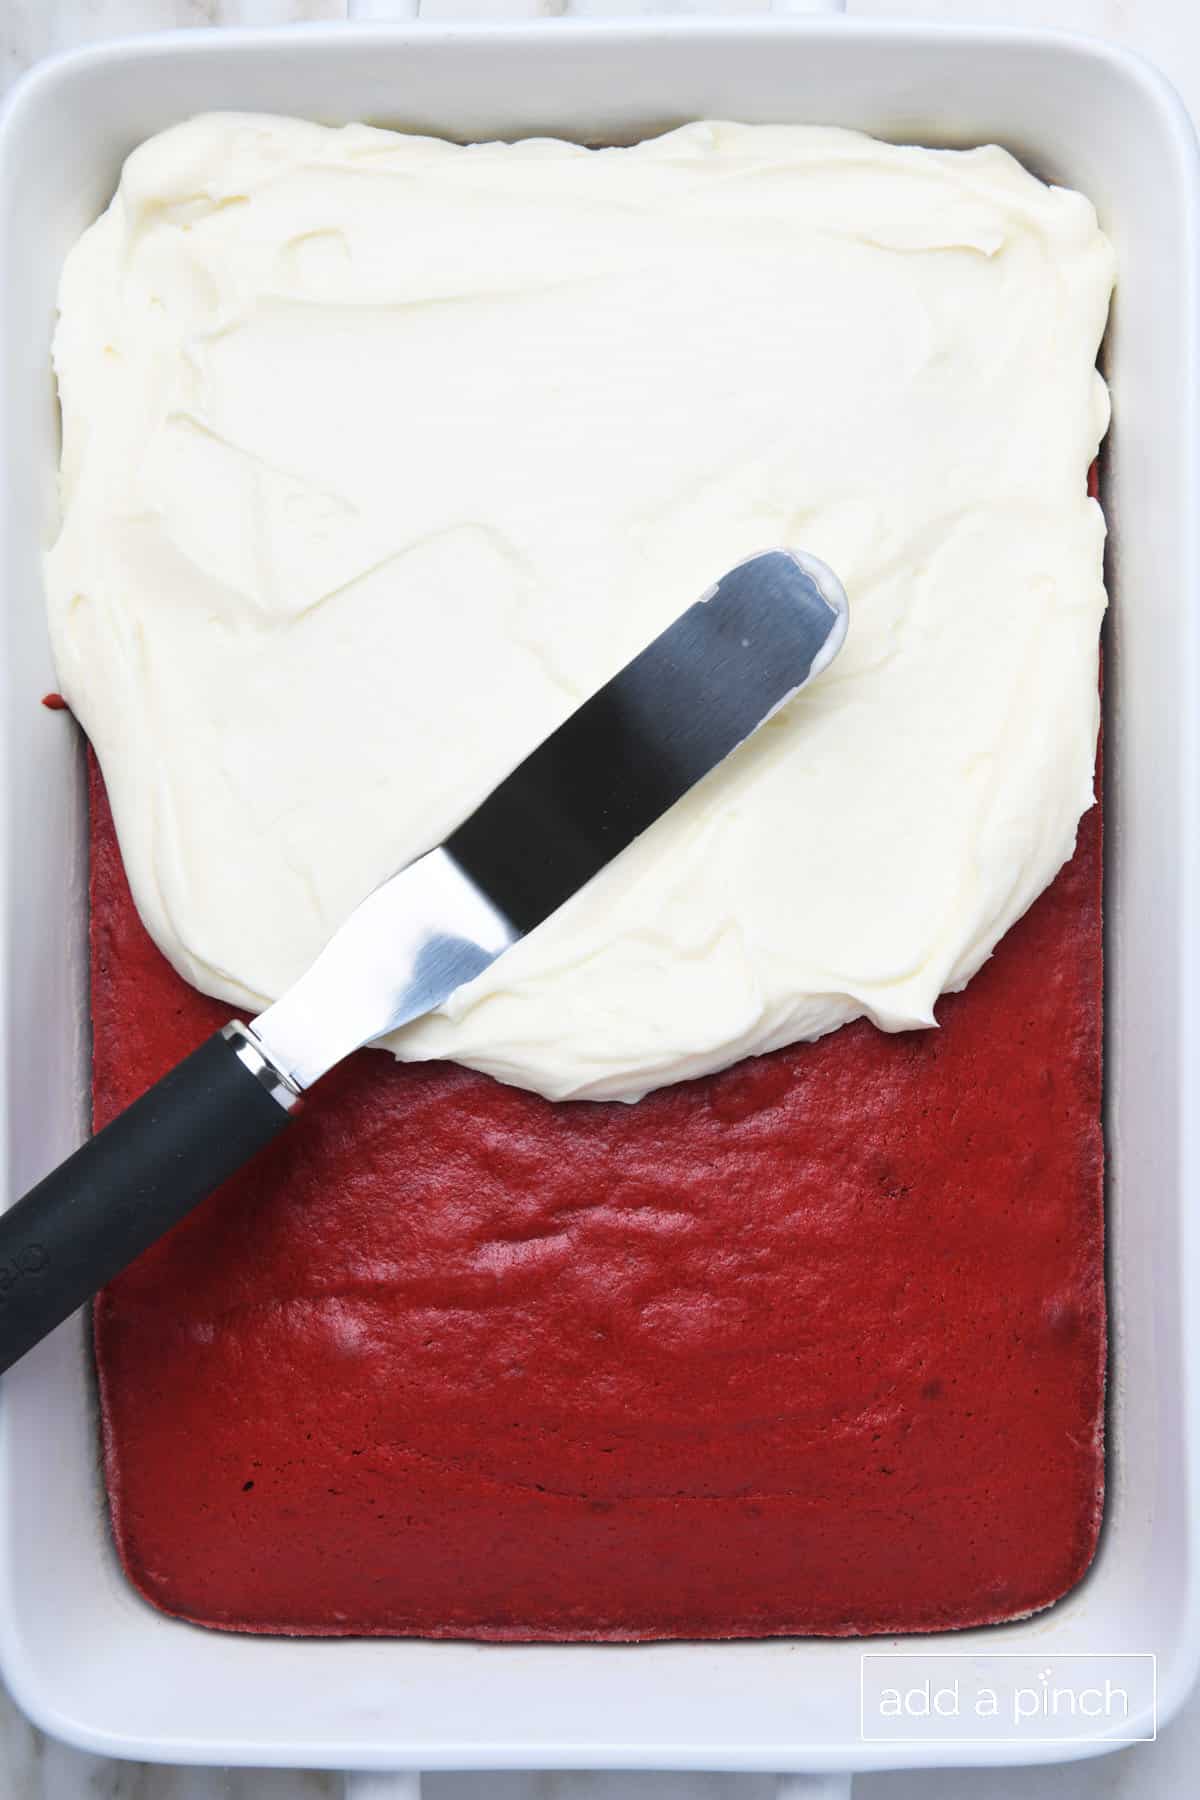 Cream cheese frosting being spread with an offset spatula onto a Red Velvet sheet cake.